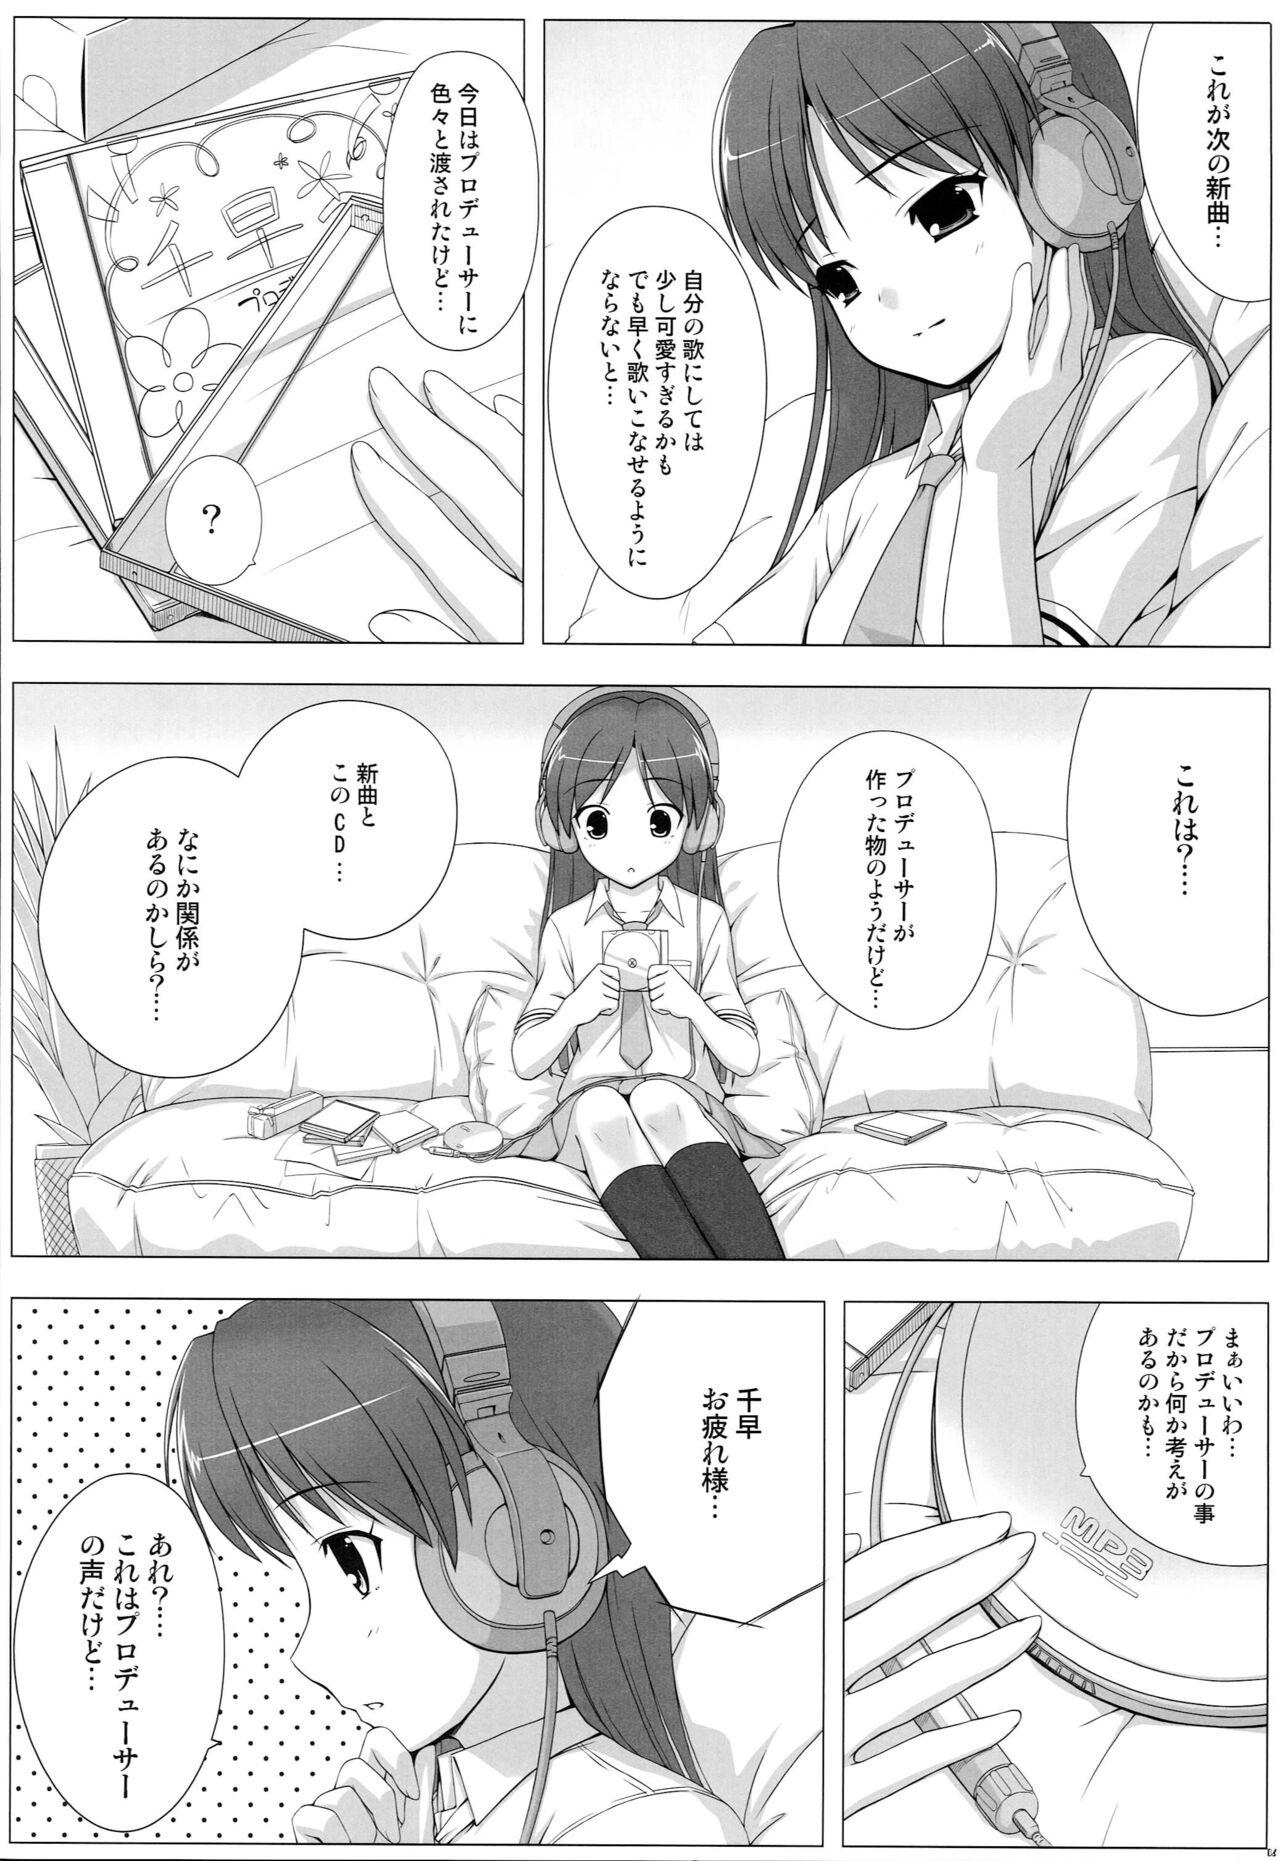 Pounding BAD COMMUNICATION? 09 - The idolmaster Parties - Page 5